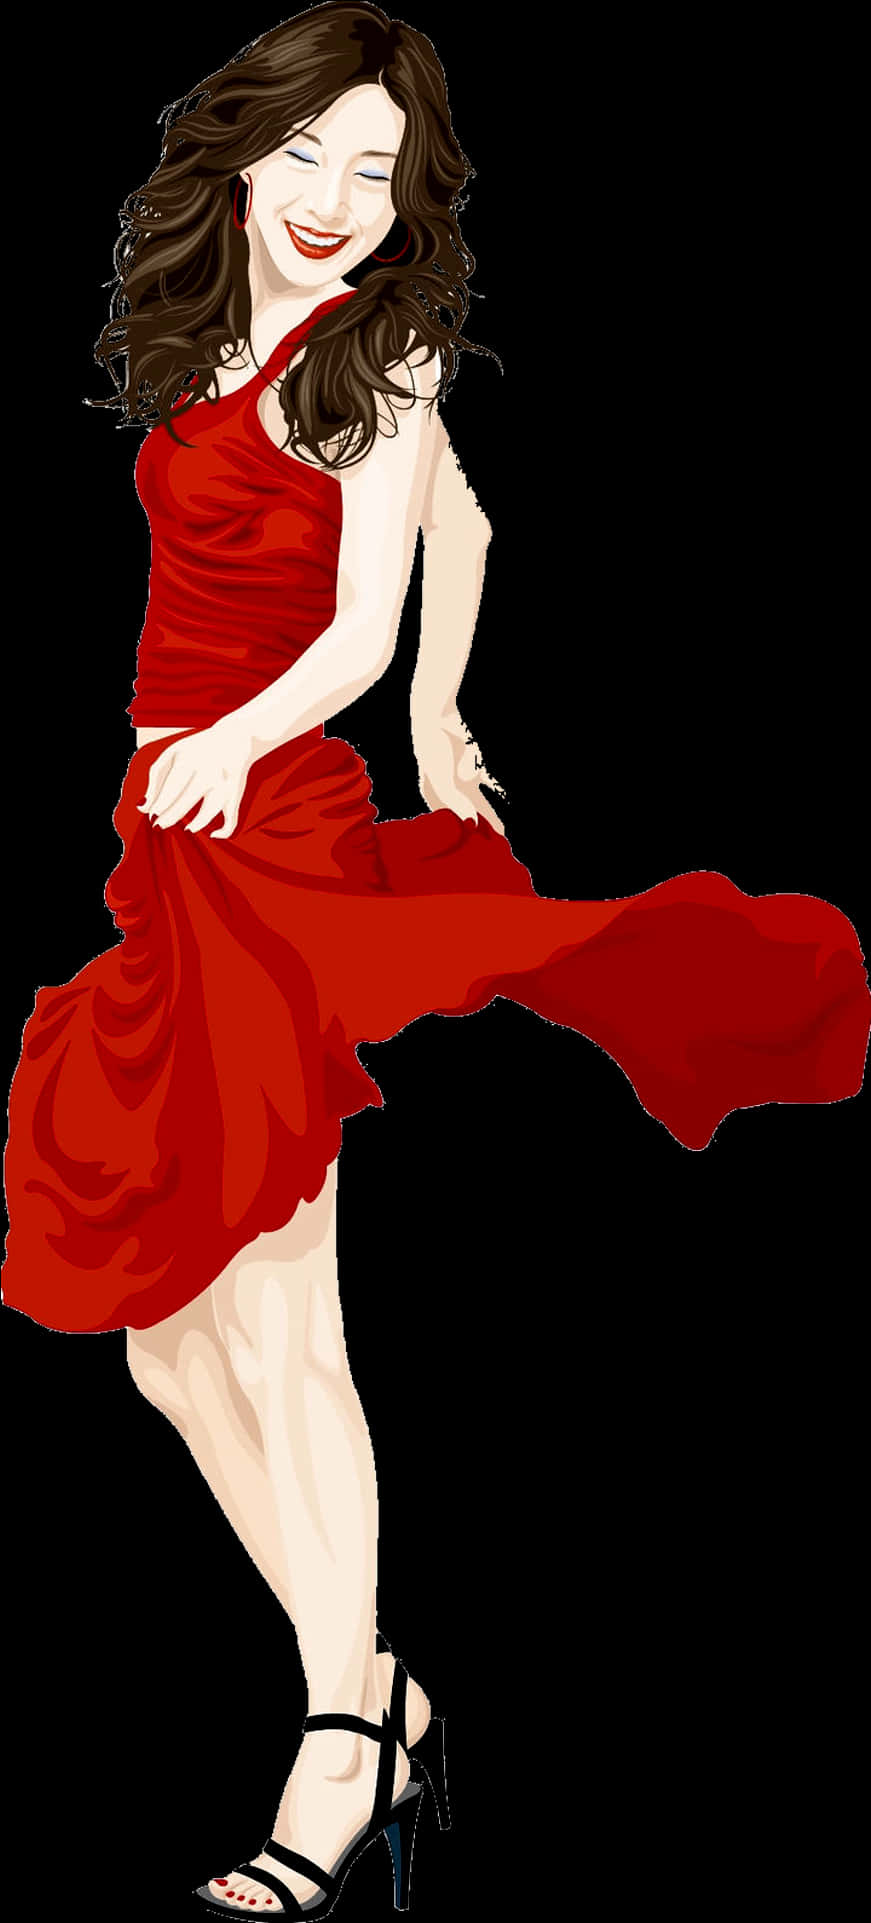 A Woman In A Red Dress